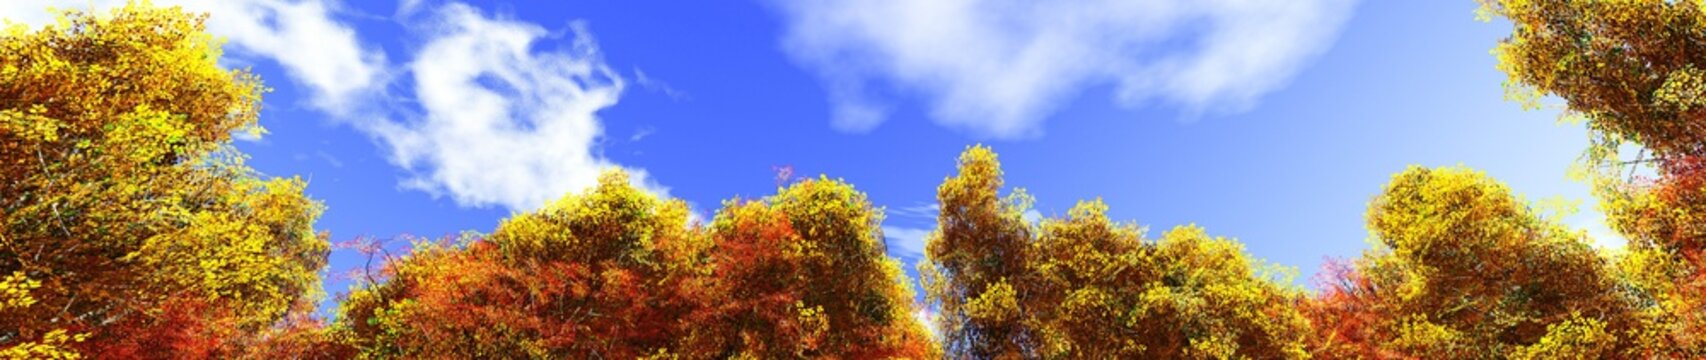 Autumn trees against a blue sky with clouds. © ustas